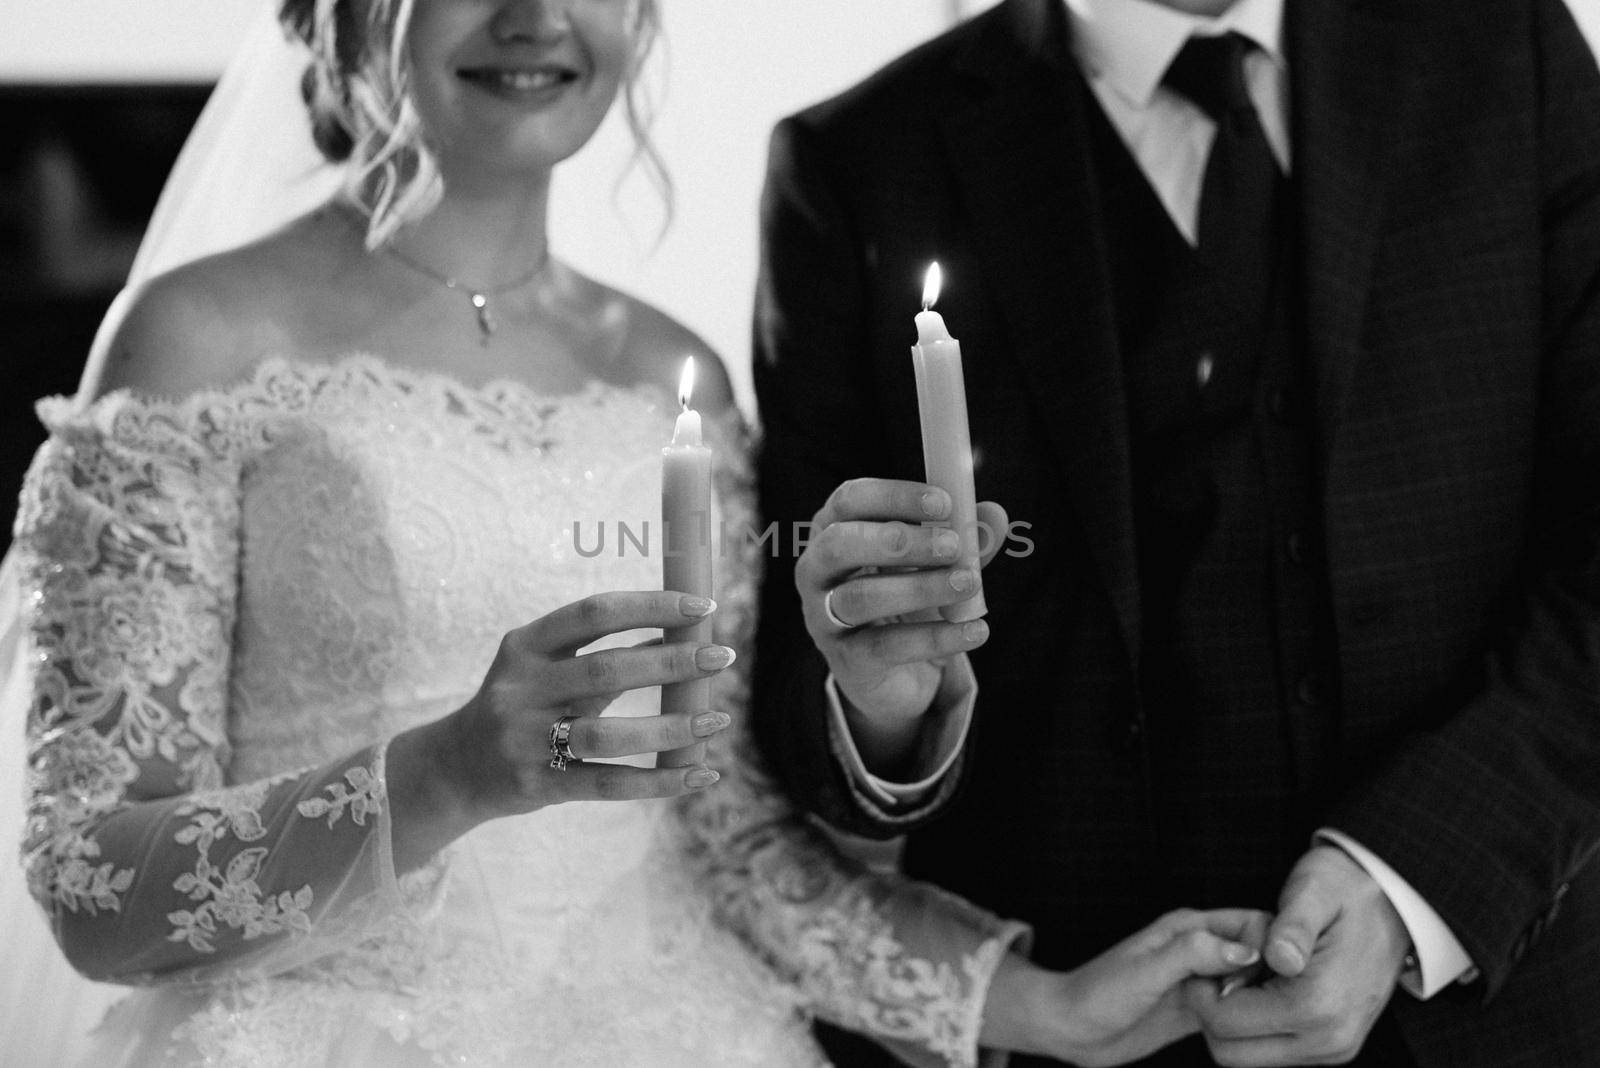 atmospheric decor of candles with live fire in the hands of the newlyweds by Andreua